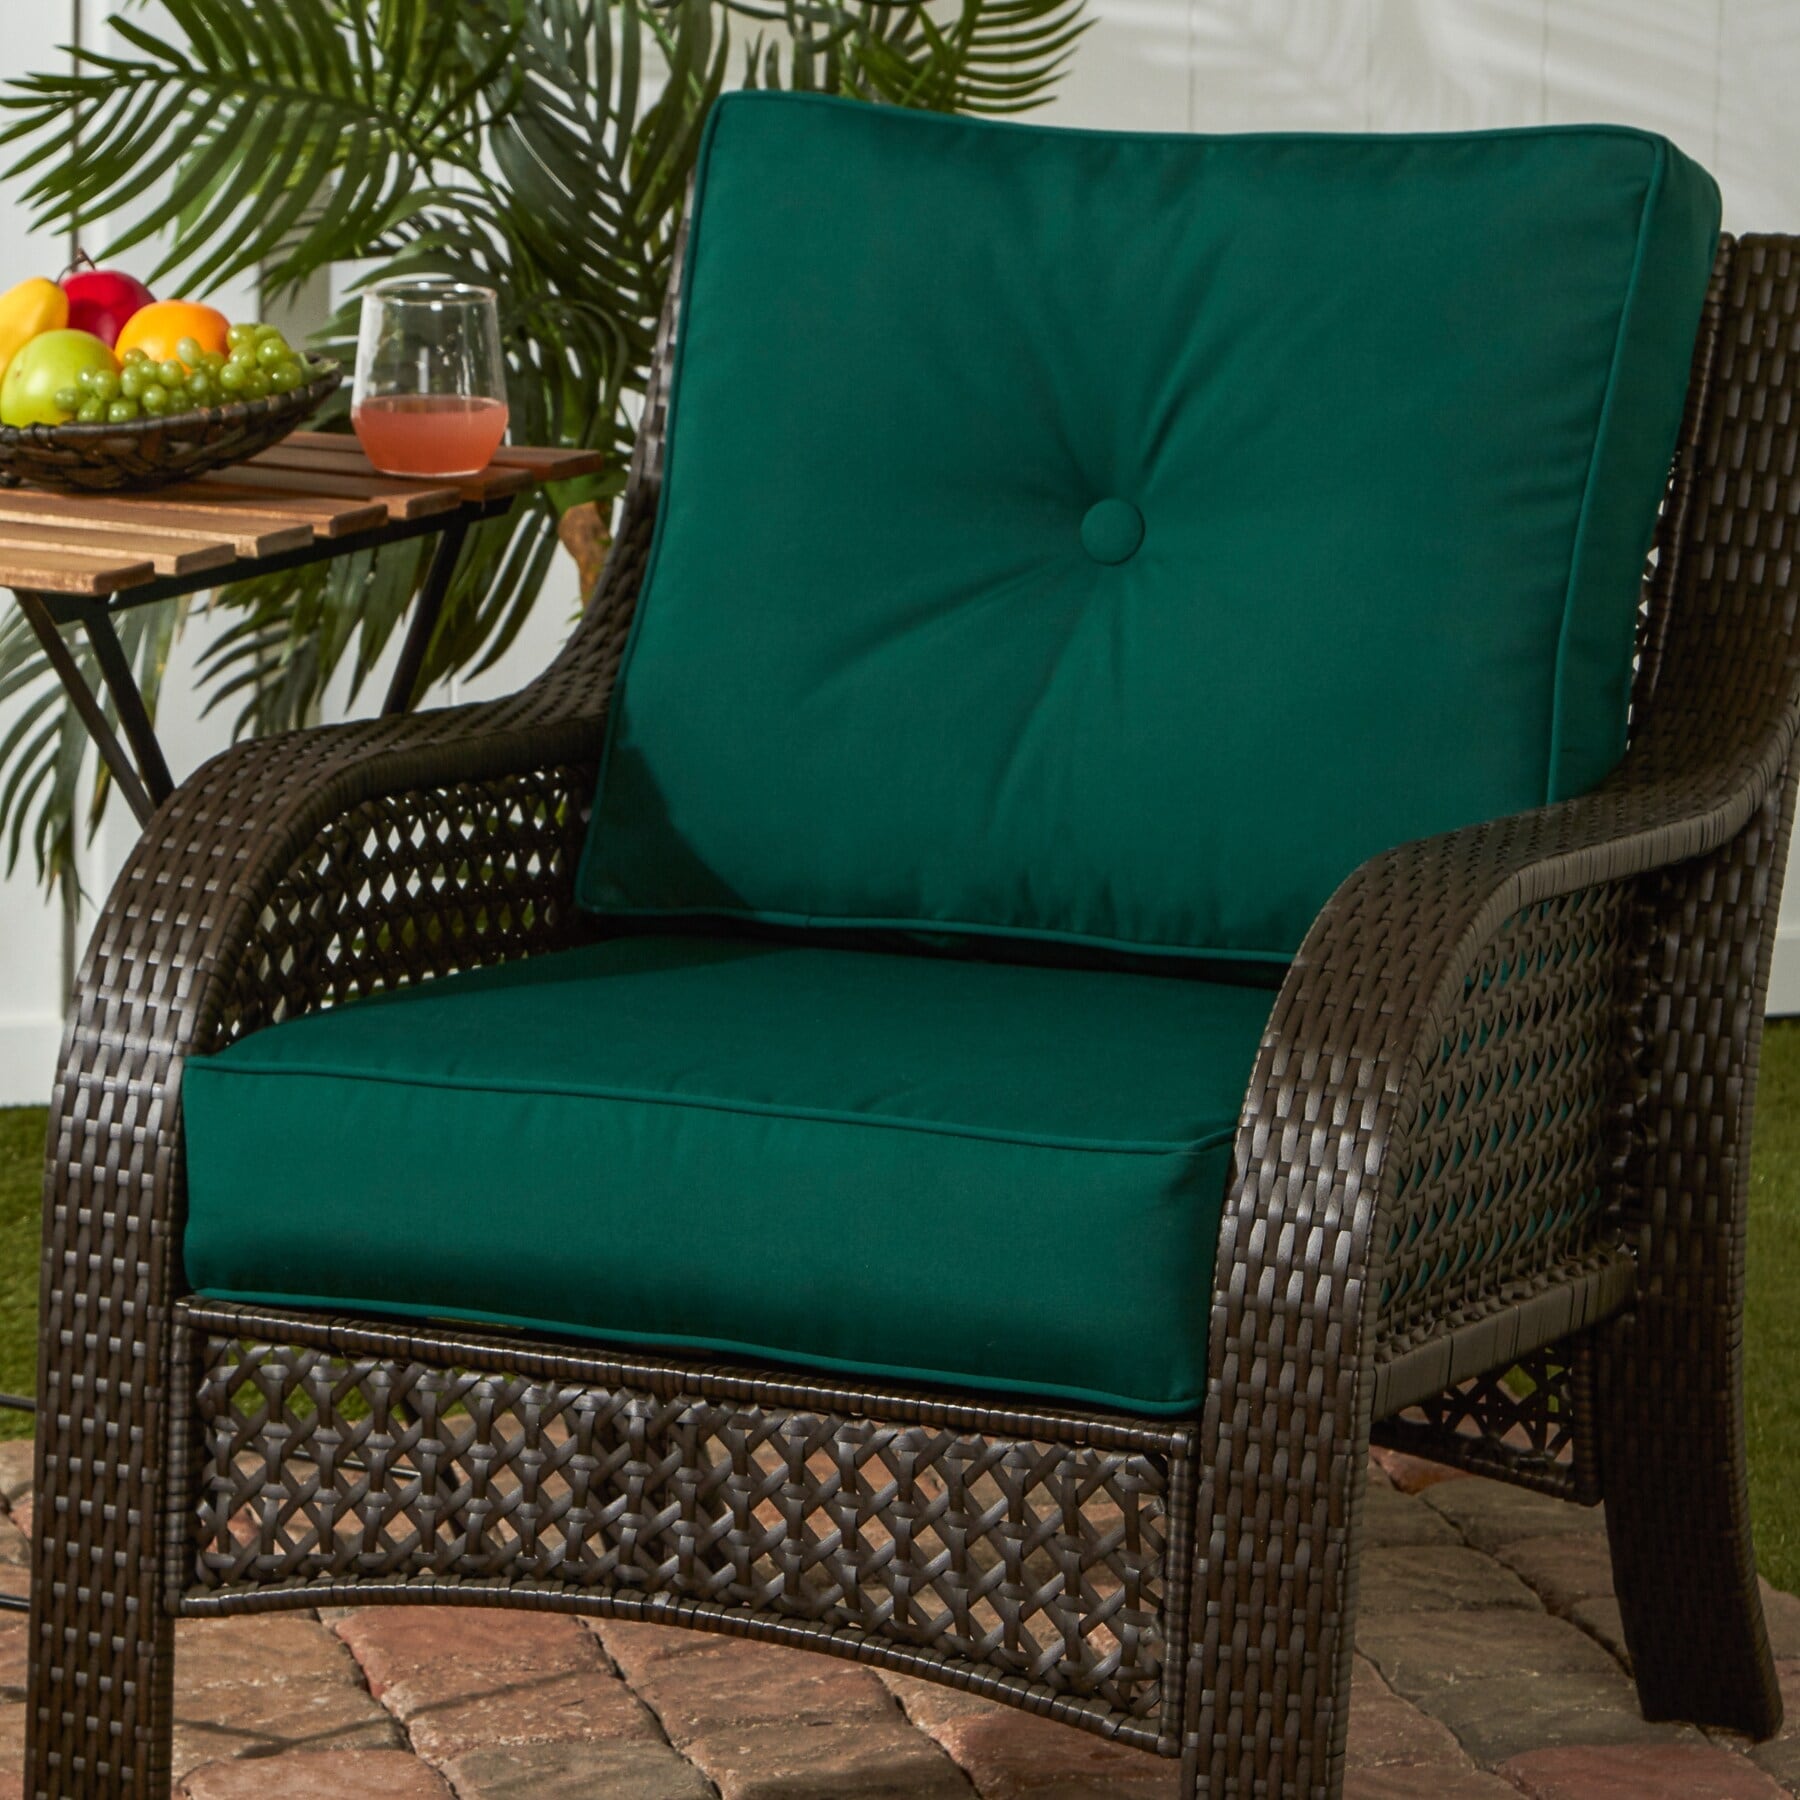 Sunbrella 2-piece Cushion and Pillow Indoor/Outdoor Set - 23 in w x 25 in d  - On Sale - Bed Bath & Beyond - 11710329